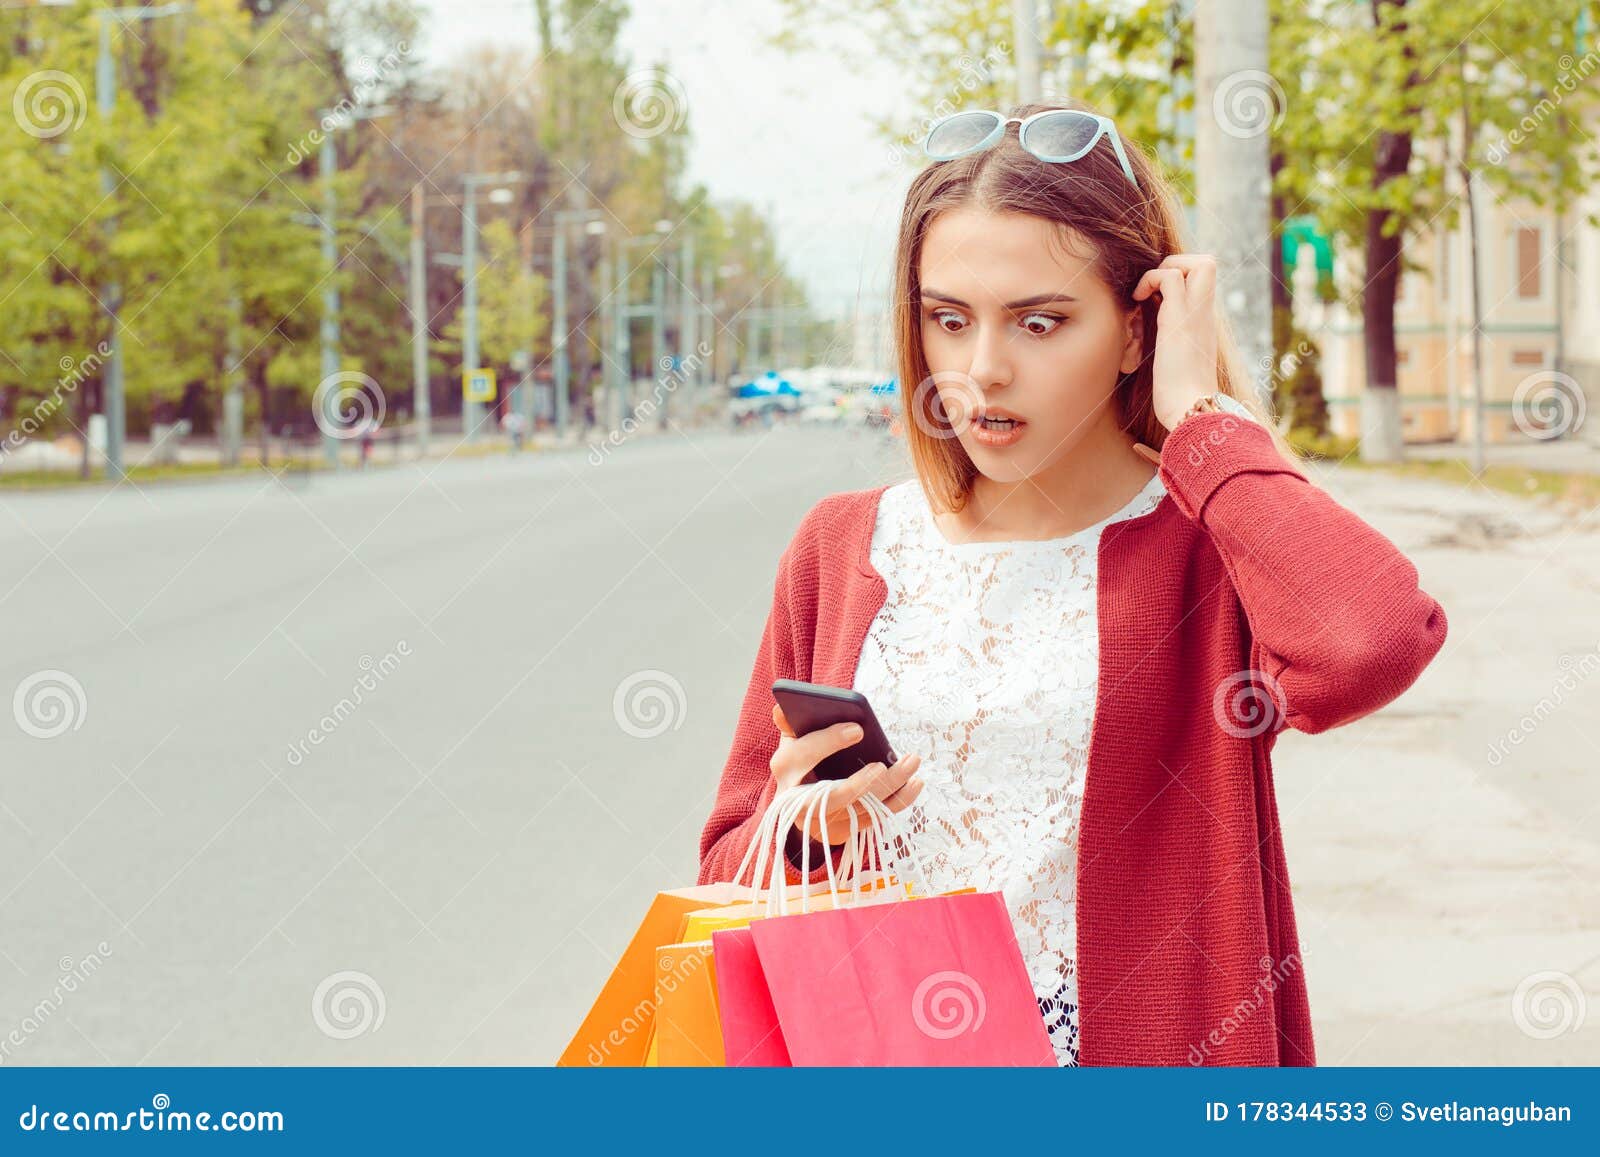 sms. closeup portrait funny shocked anxious scared young girl lady looking at phone seeing bad news photos bully message with